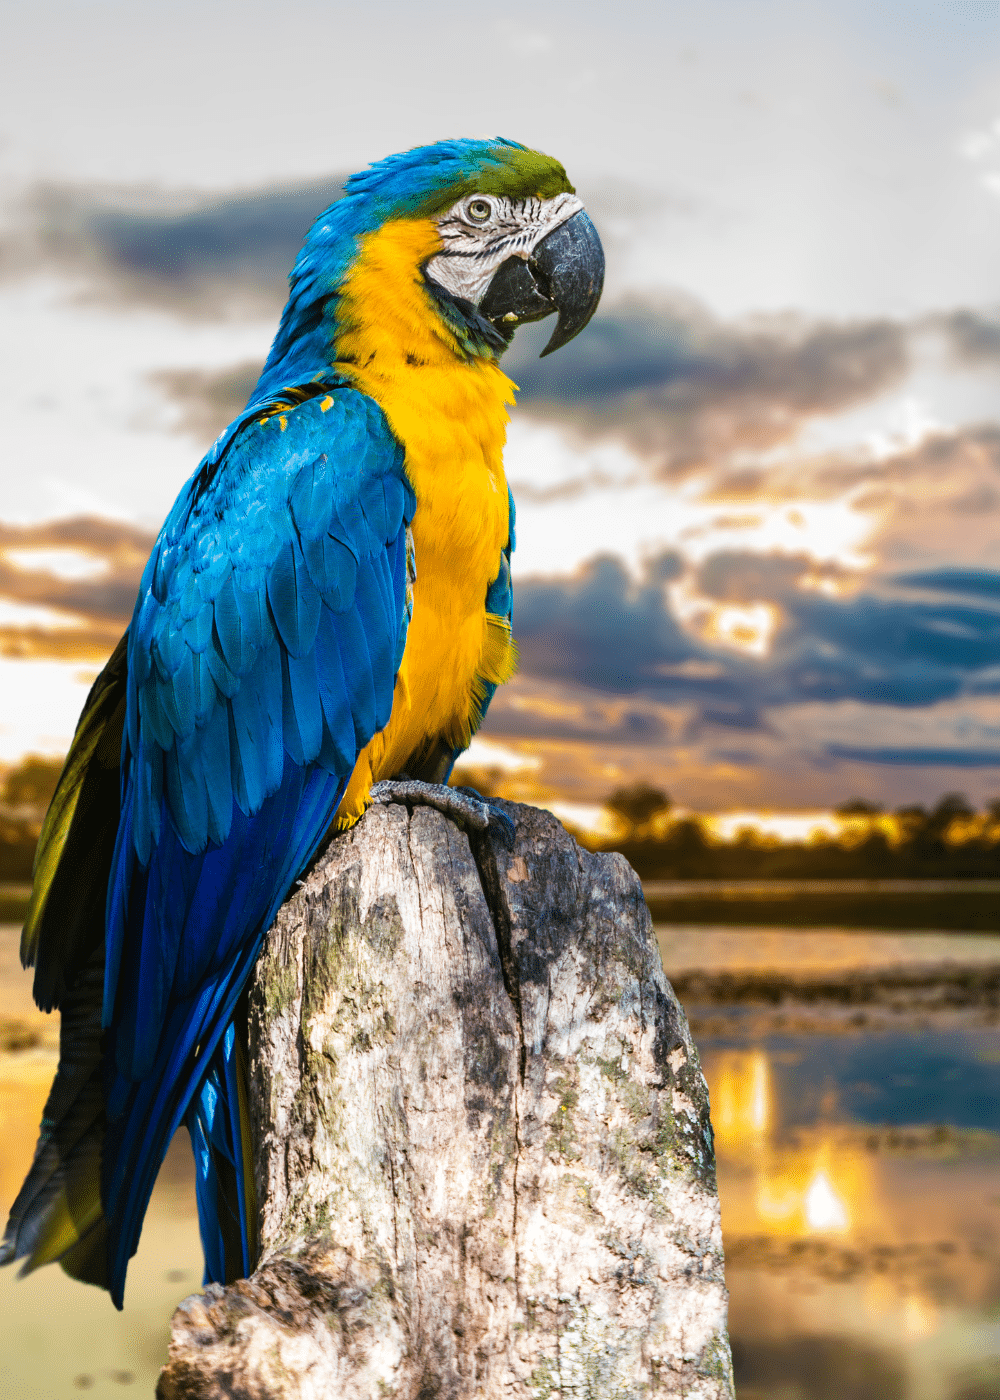 Do I need a visa for Brazil from the UK? - parrot